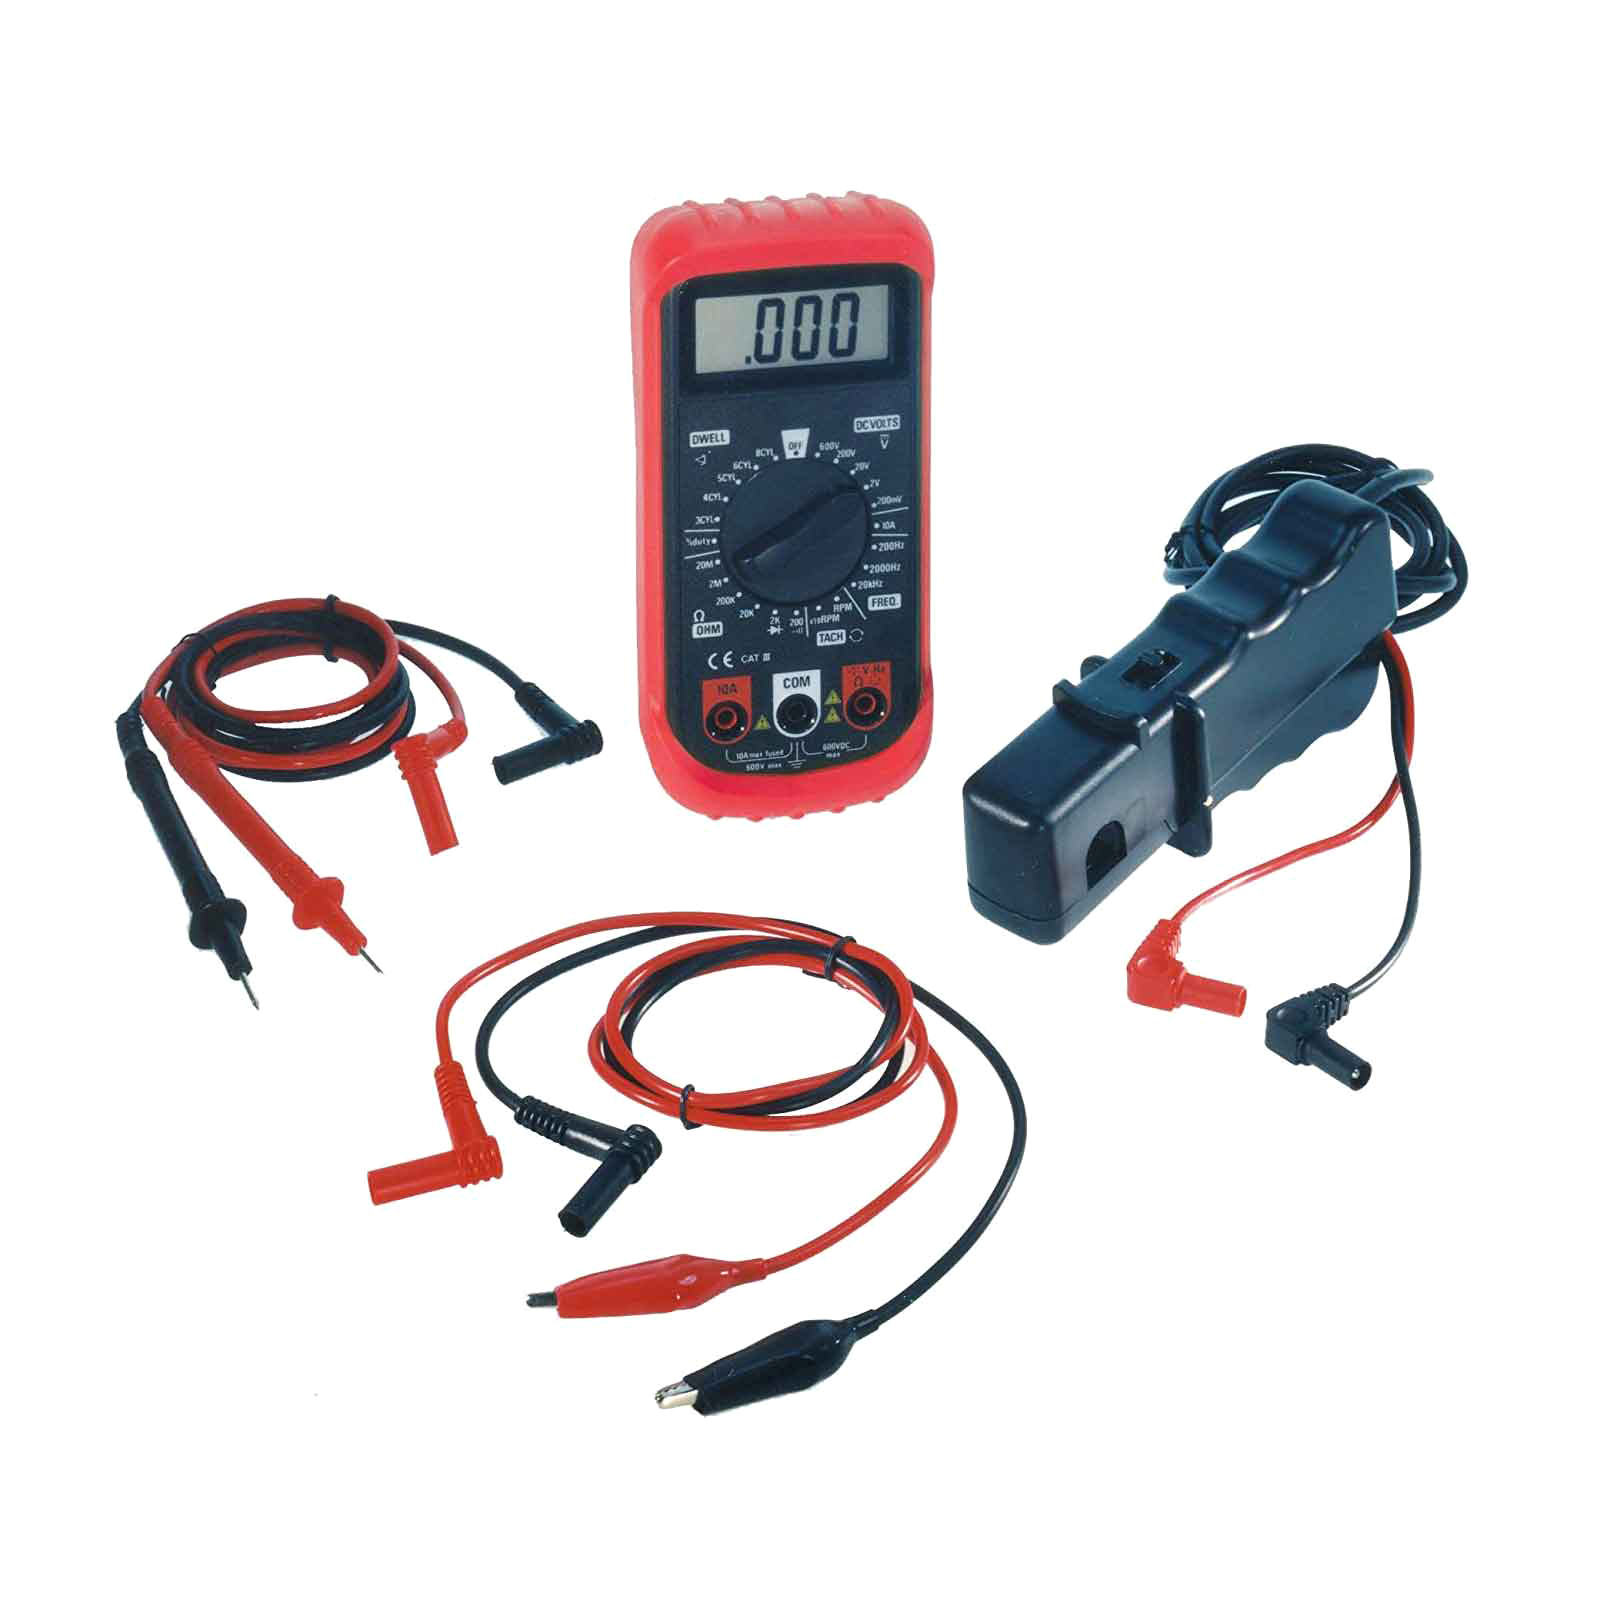 Electronic Specialties Automotive Digital Multimeter with Holster